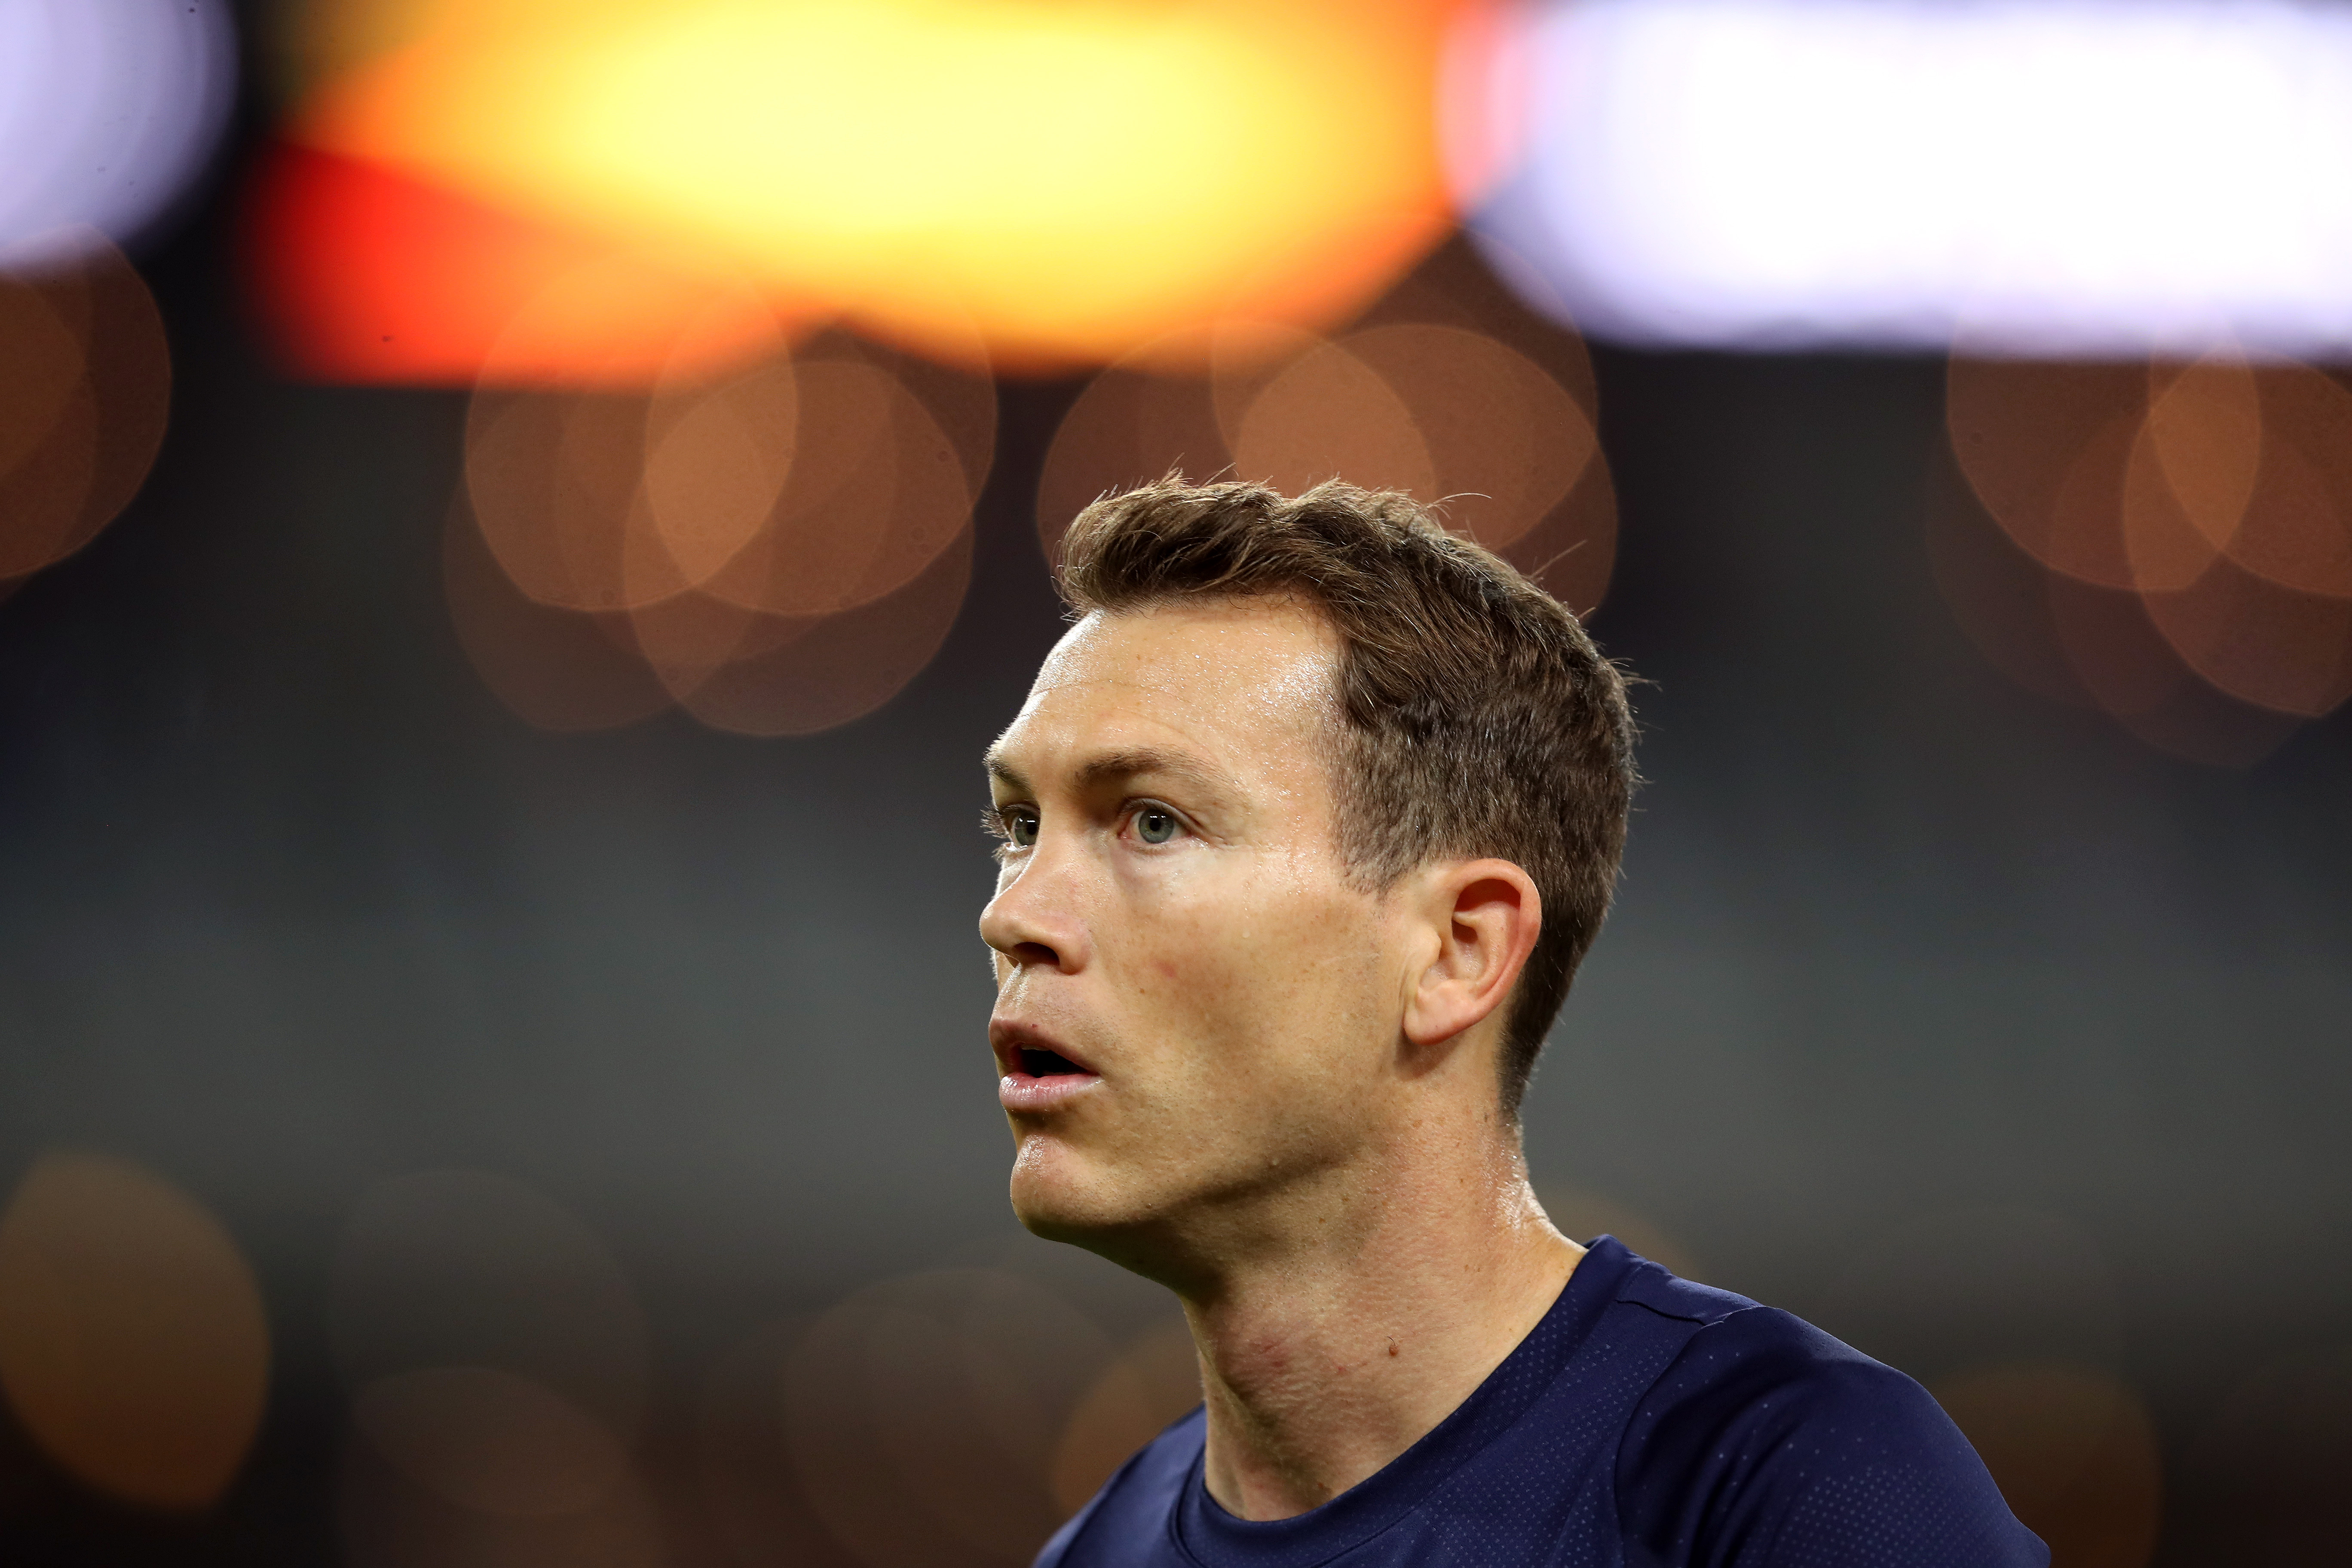 BAKU, AZERBAIJAN - OCTOBER 04:  Stephan Lichtsteiner of Arsenal looks on prior to the UEFA Europa League Group E match between Qarabag FK and Arsenal at  on October 4, 2018 in Baku, Azerbaijan.  (Photo by Francois Nel/Getty Images)